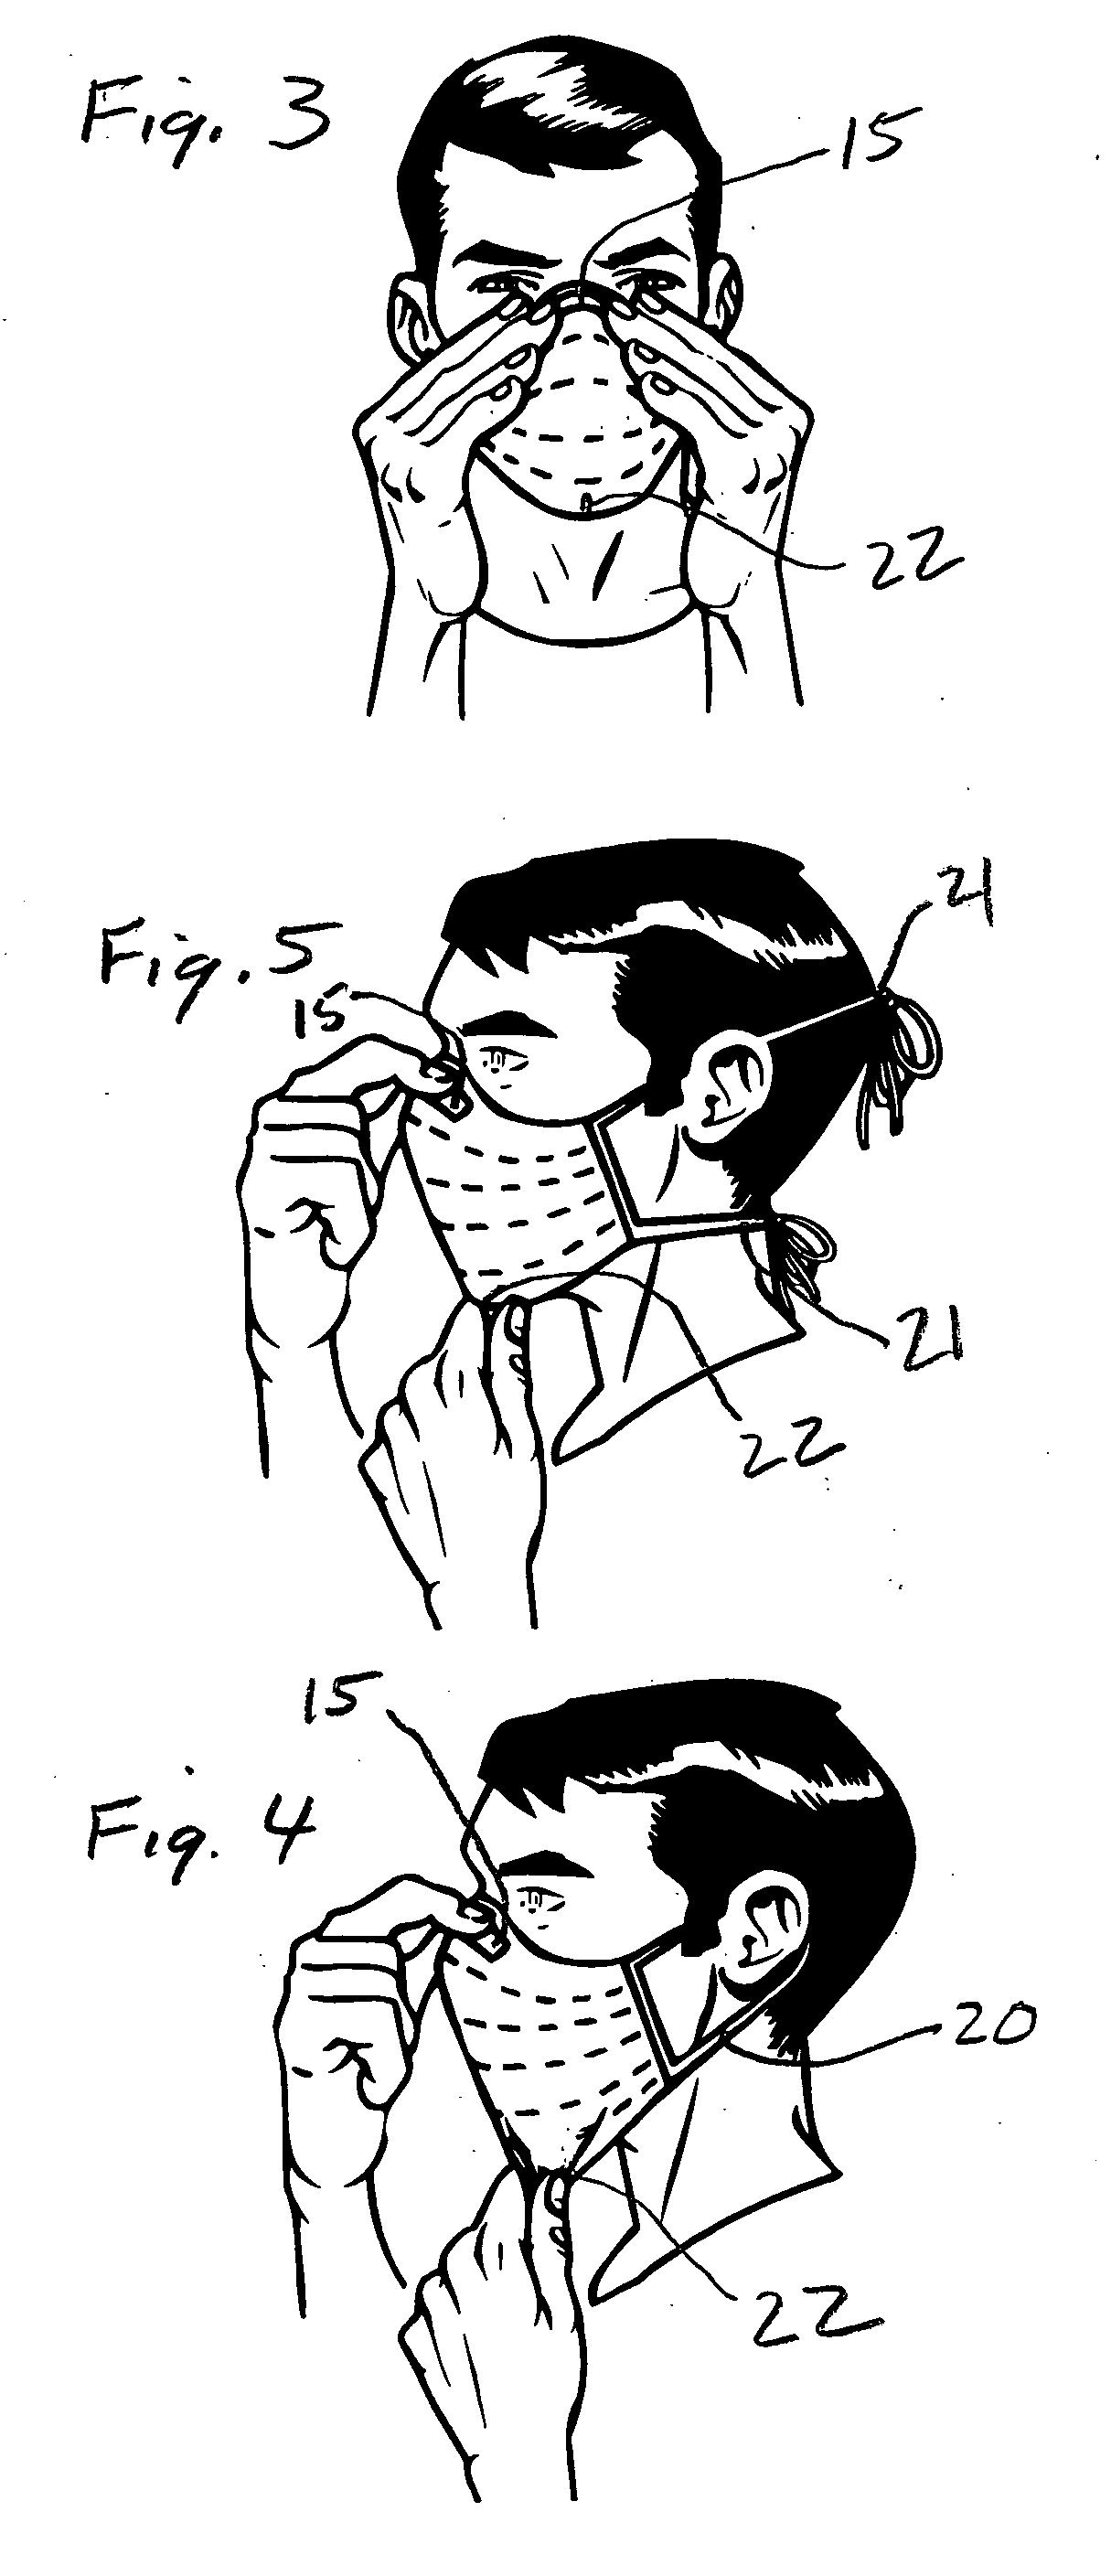 Personal protection, procedural and surgical mask